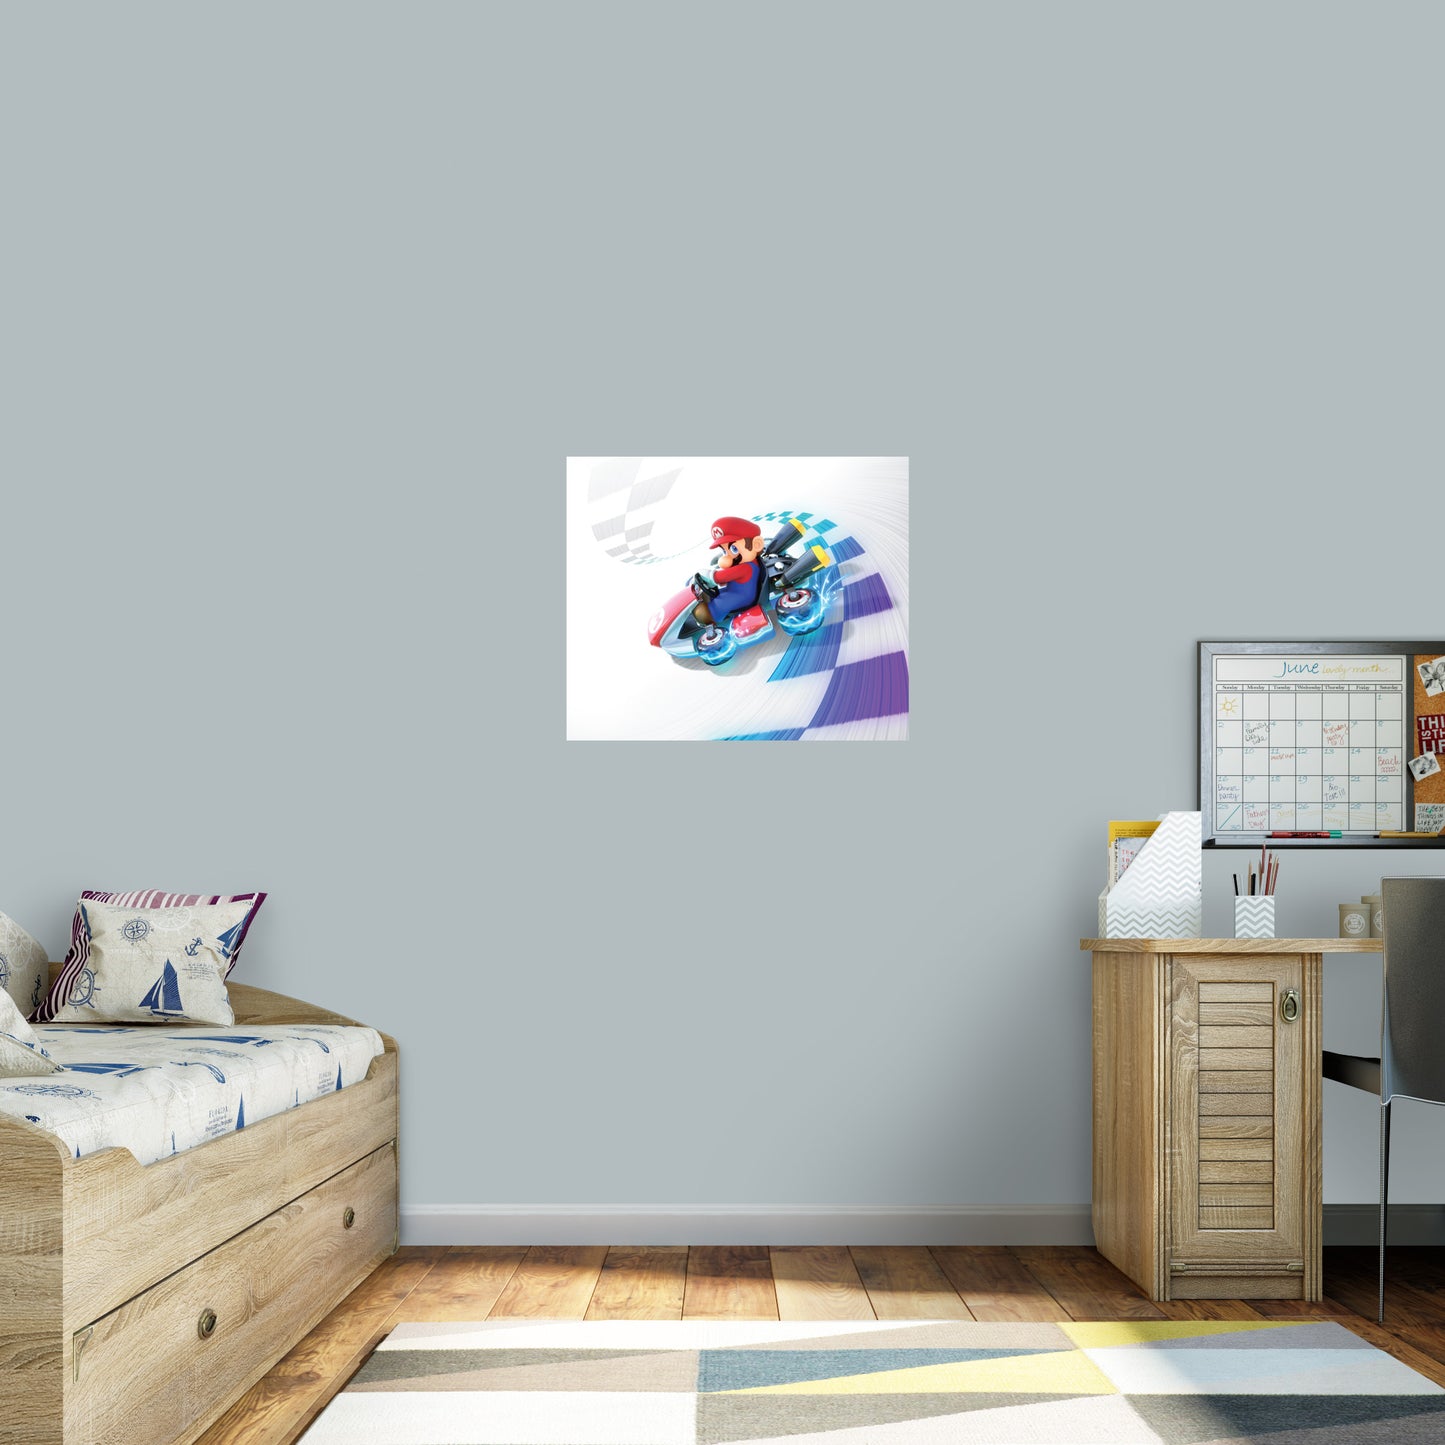 Mario Kart: Snow Turn Mural        -   Removable     Adhesive Decal